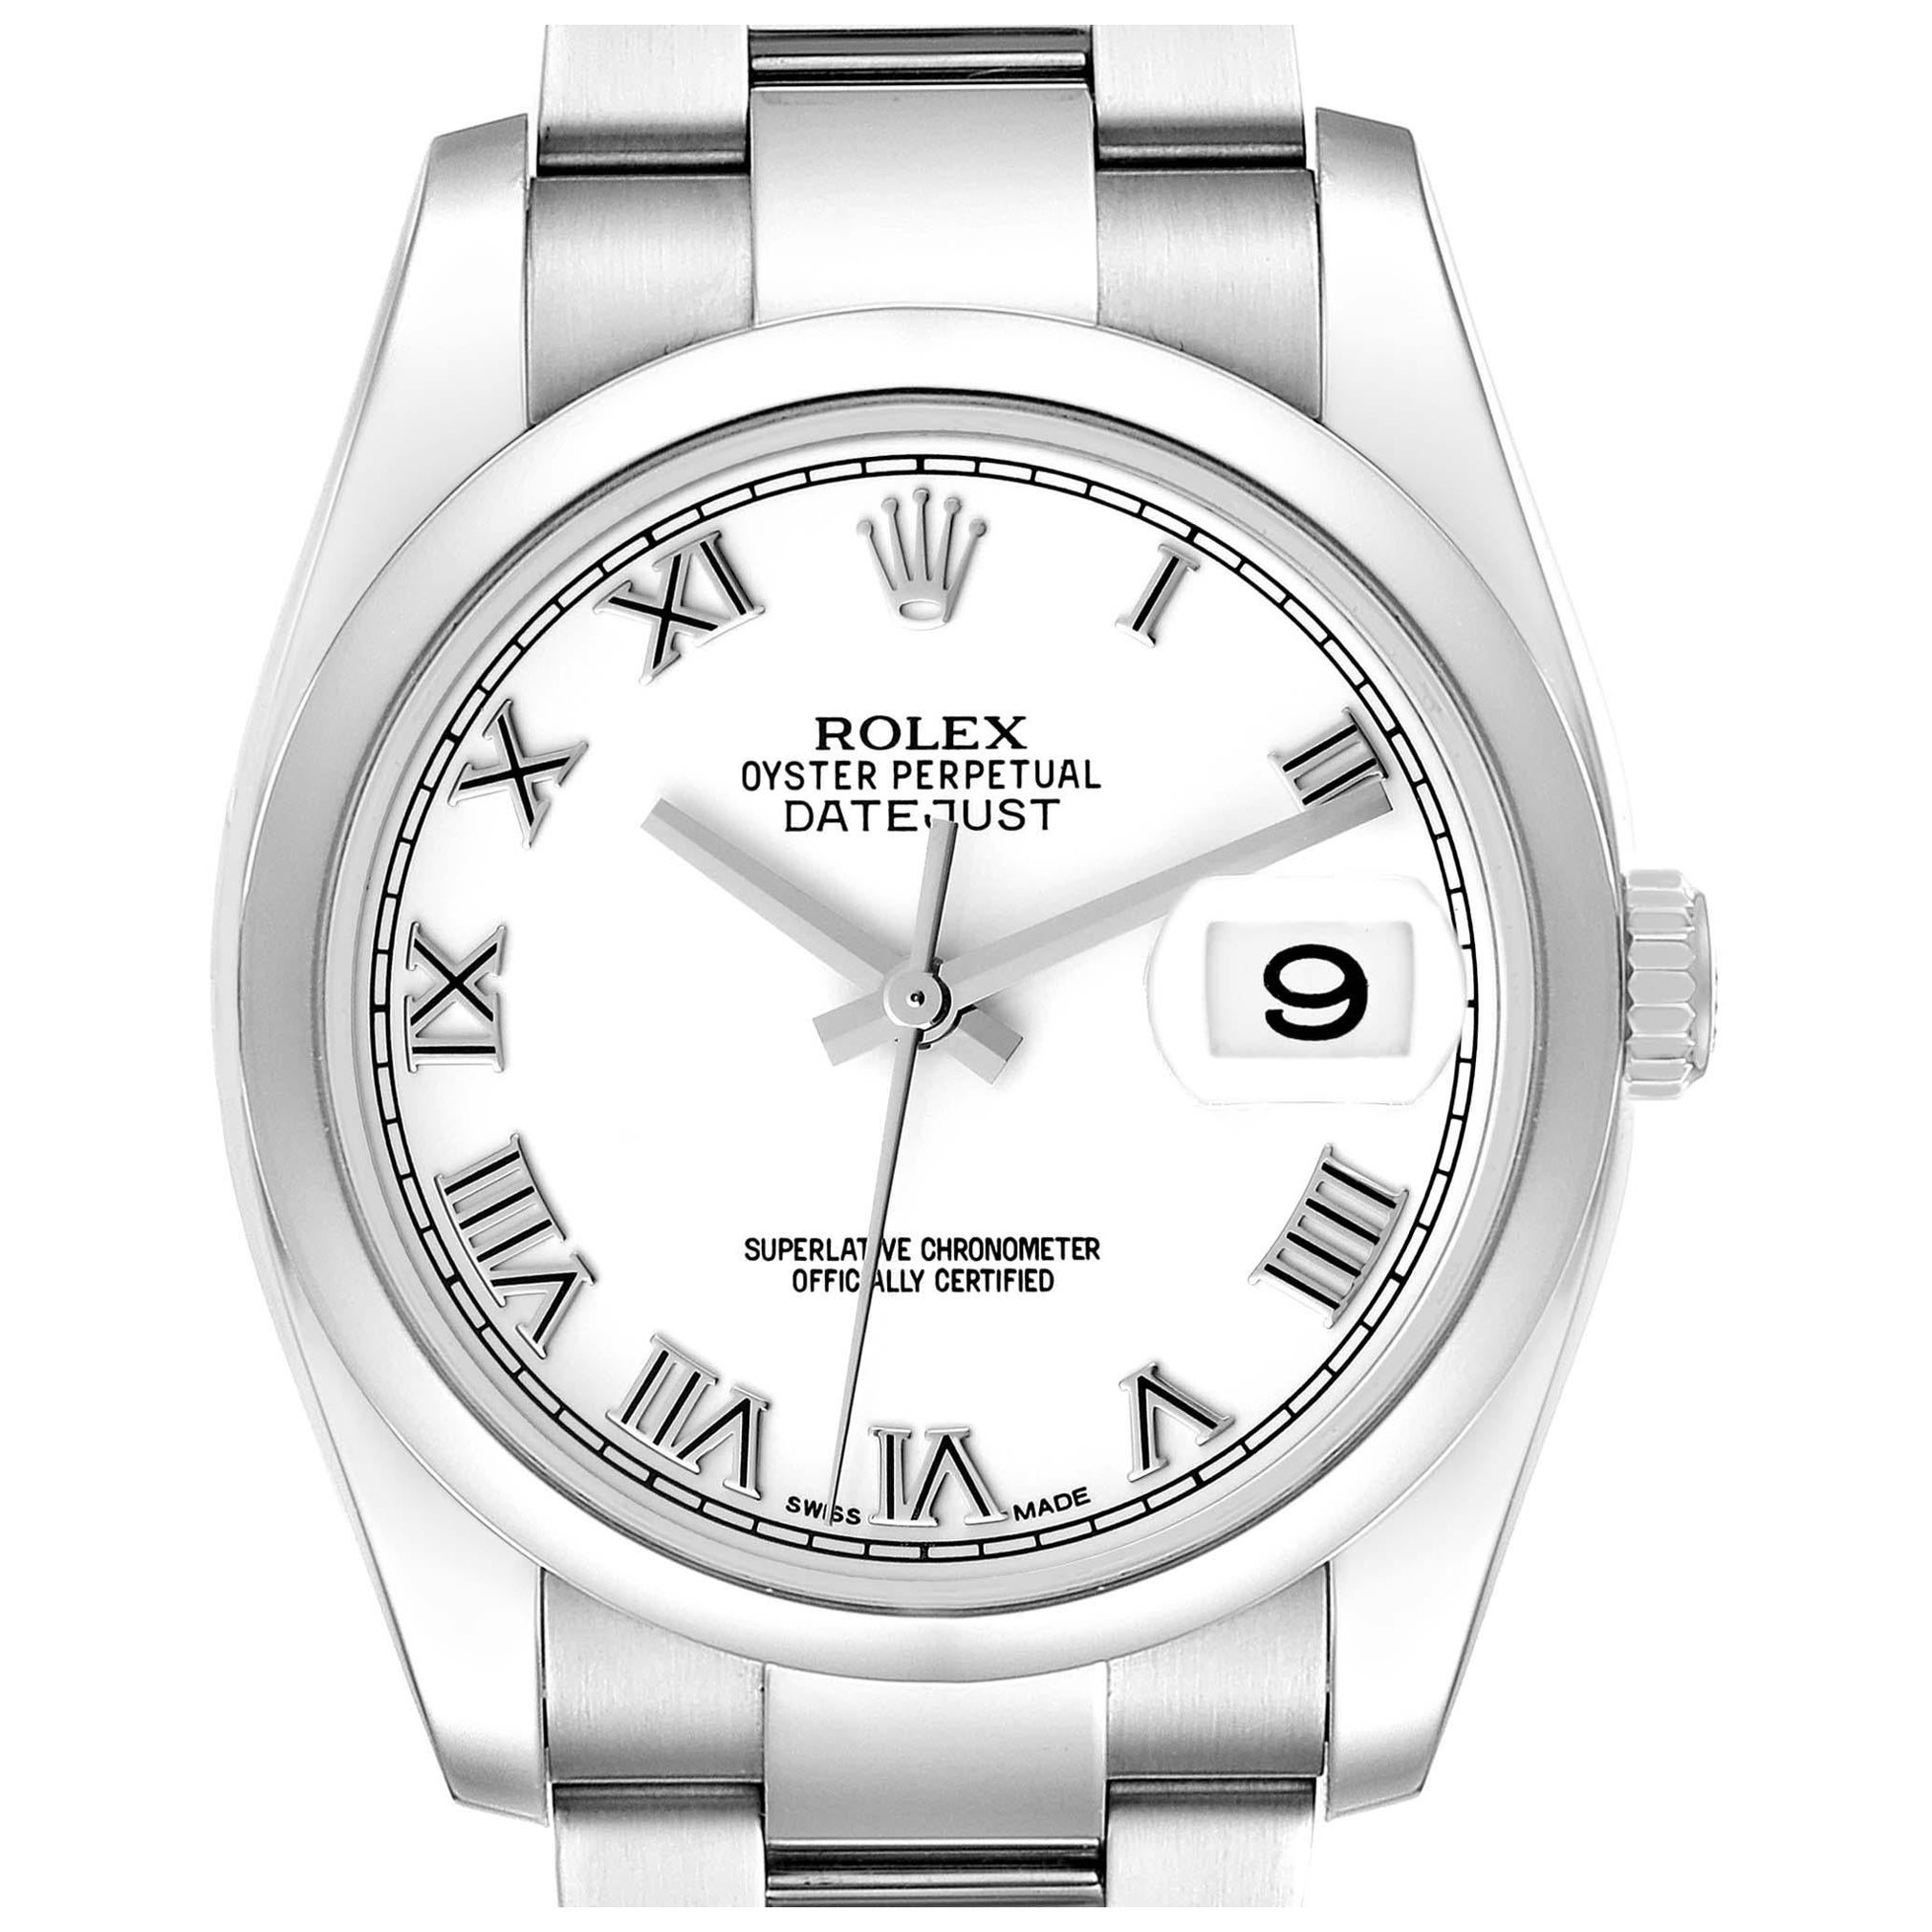 Rolex Datejust White Roman Dial Steel Mens Watch 116200 Box Card For Sale